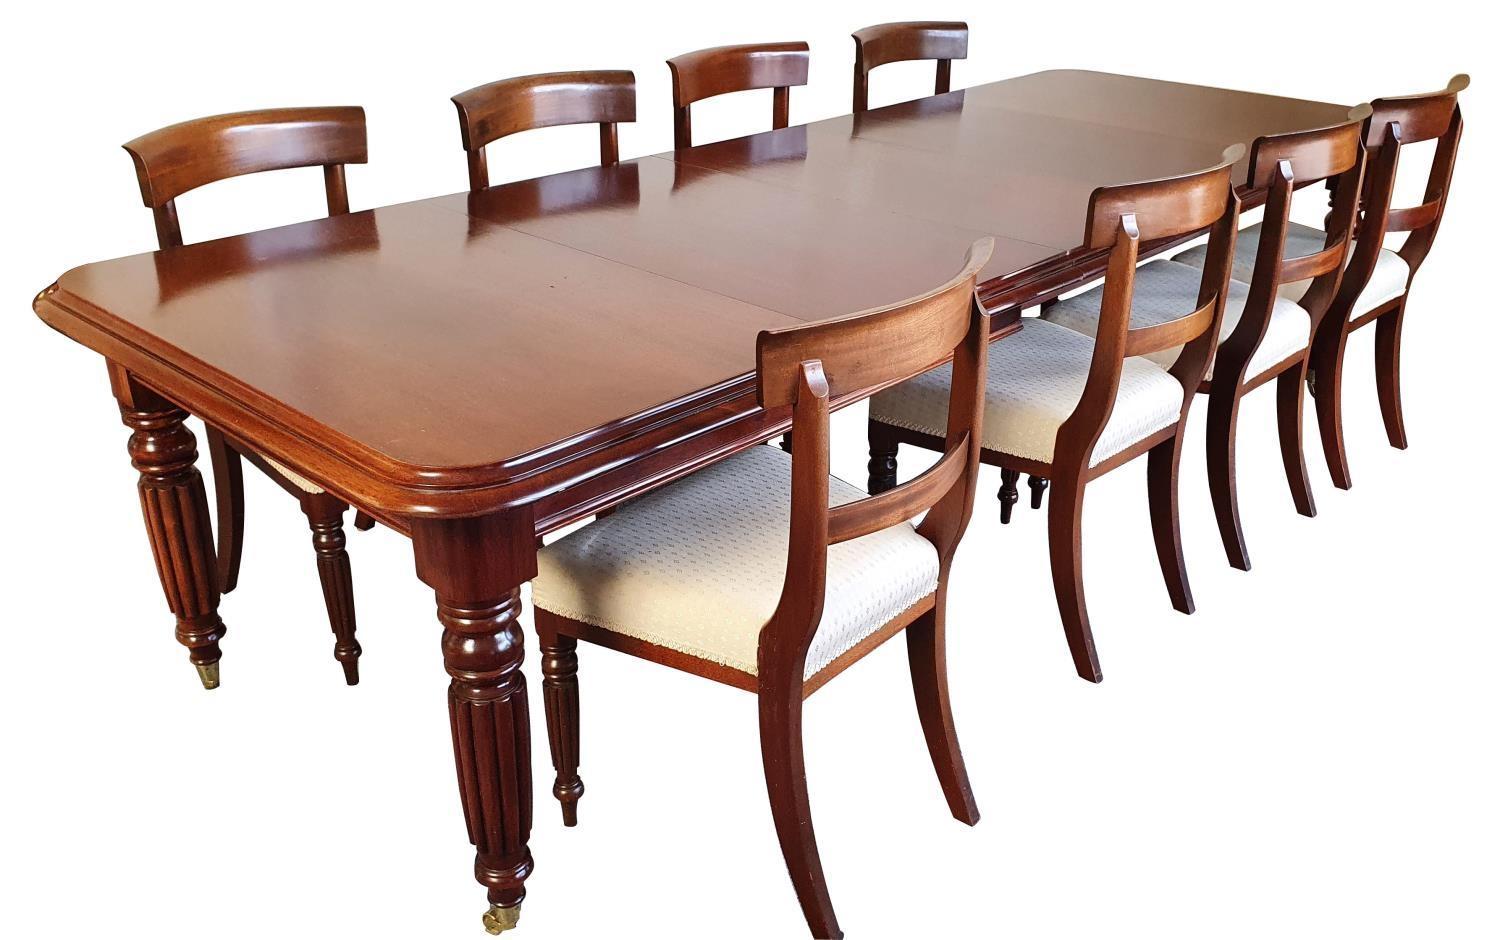 A Victorian style mahogany extending dining table with eight chairs, by John Mason of Lockington,